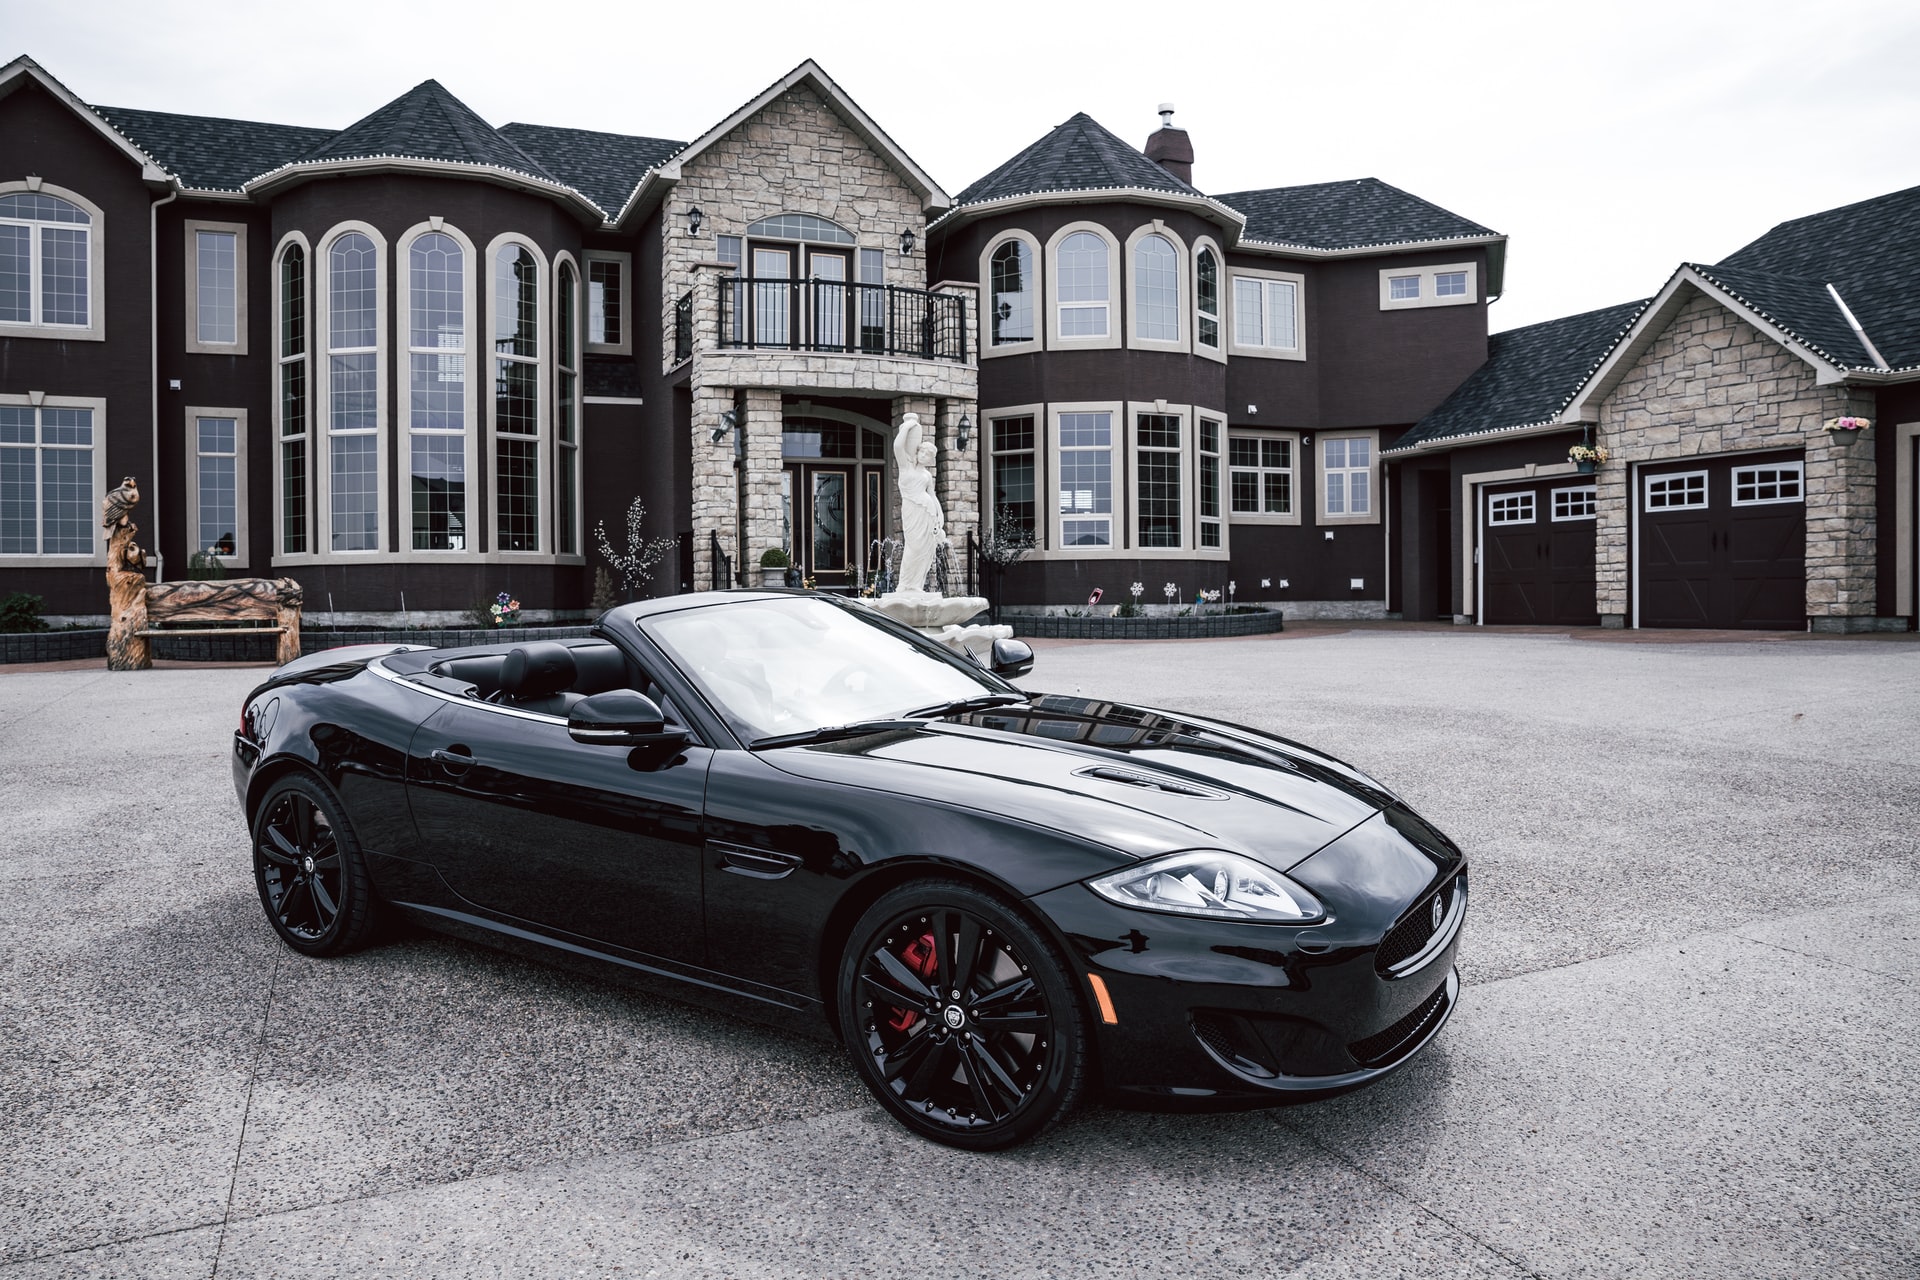 how to manifest money and overcome money blocks - huge mansion with a black sports car parked in the driveway